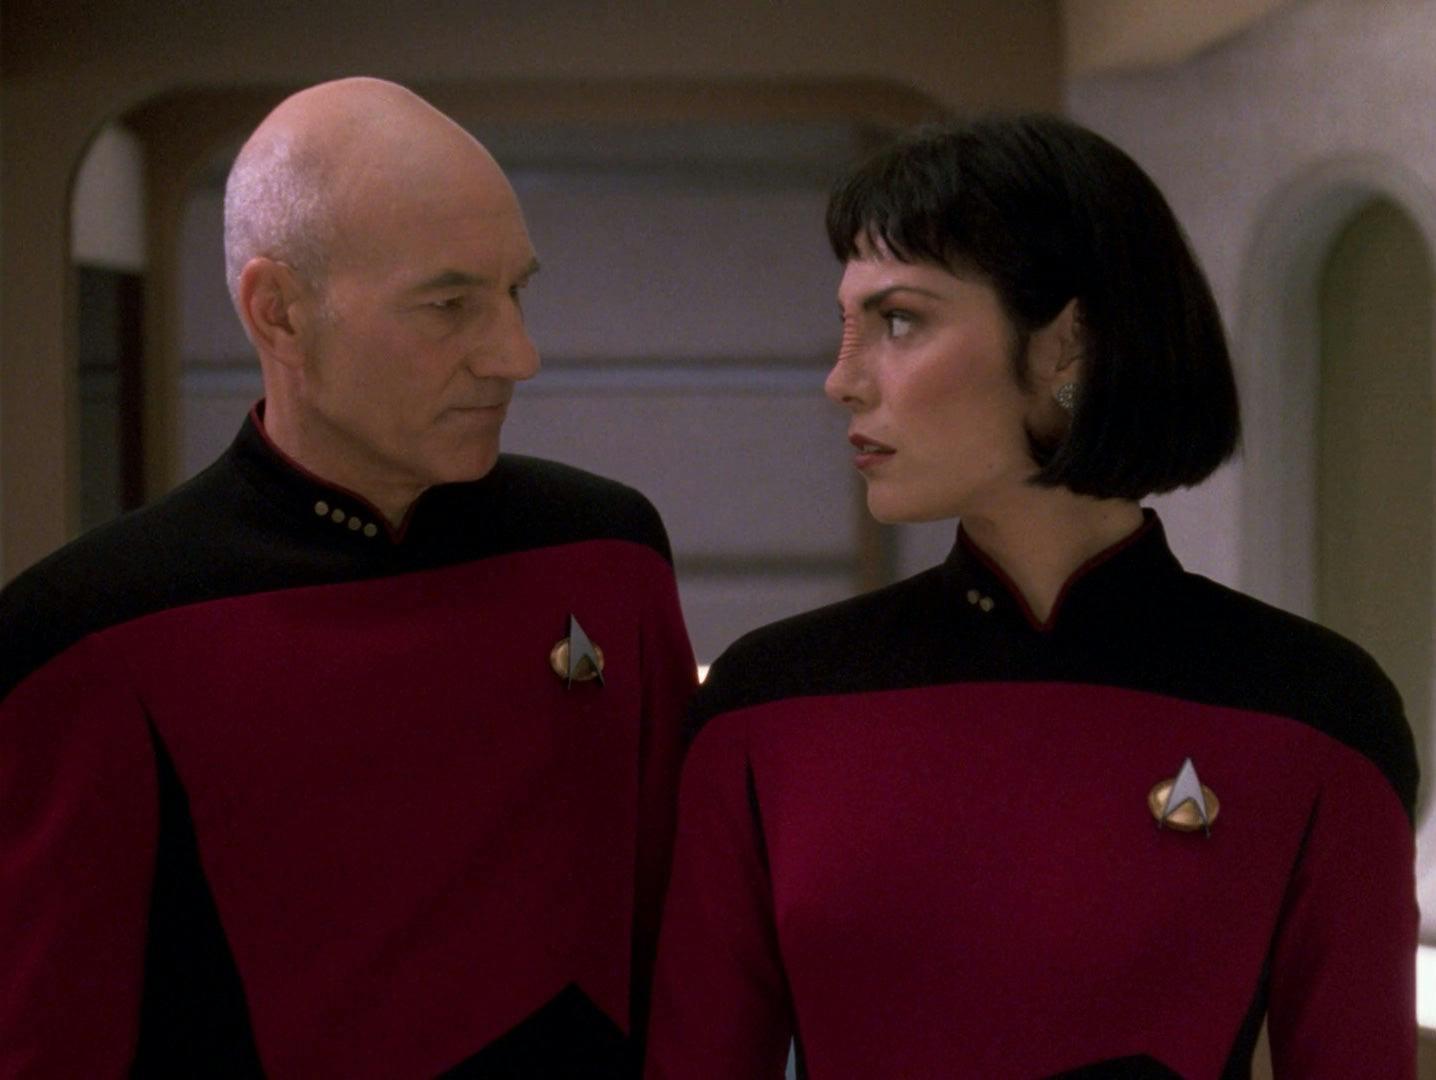 Captain Picard and Ensign Ro Laren stand side-by-side in 'Preemptive Strike'